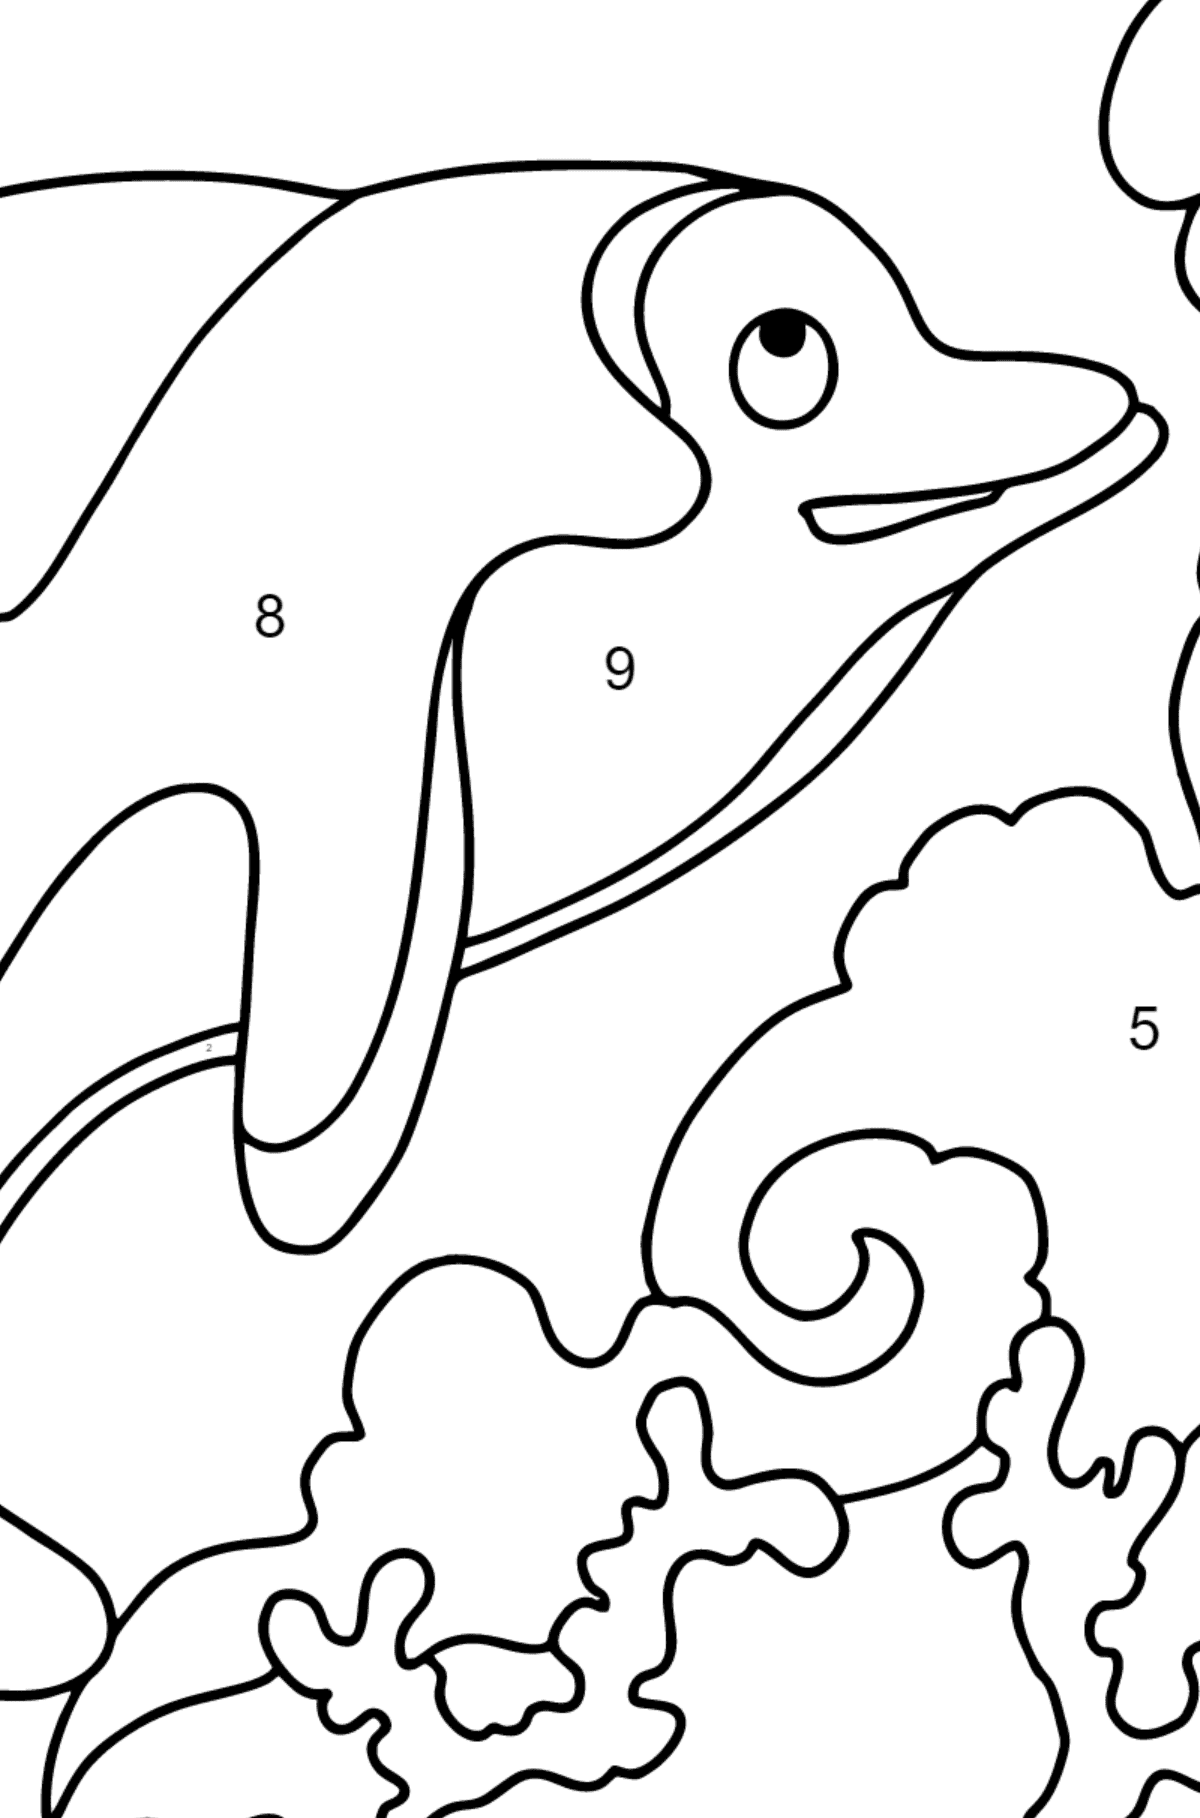 Coloring Page - A Dolphin, a Smart and Friendly Animal - Coloring by Numbers for Children